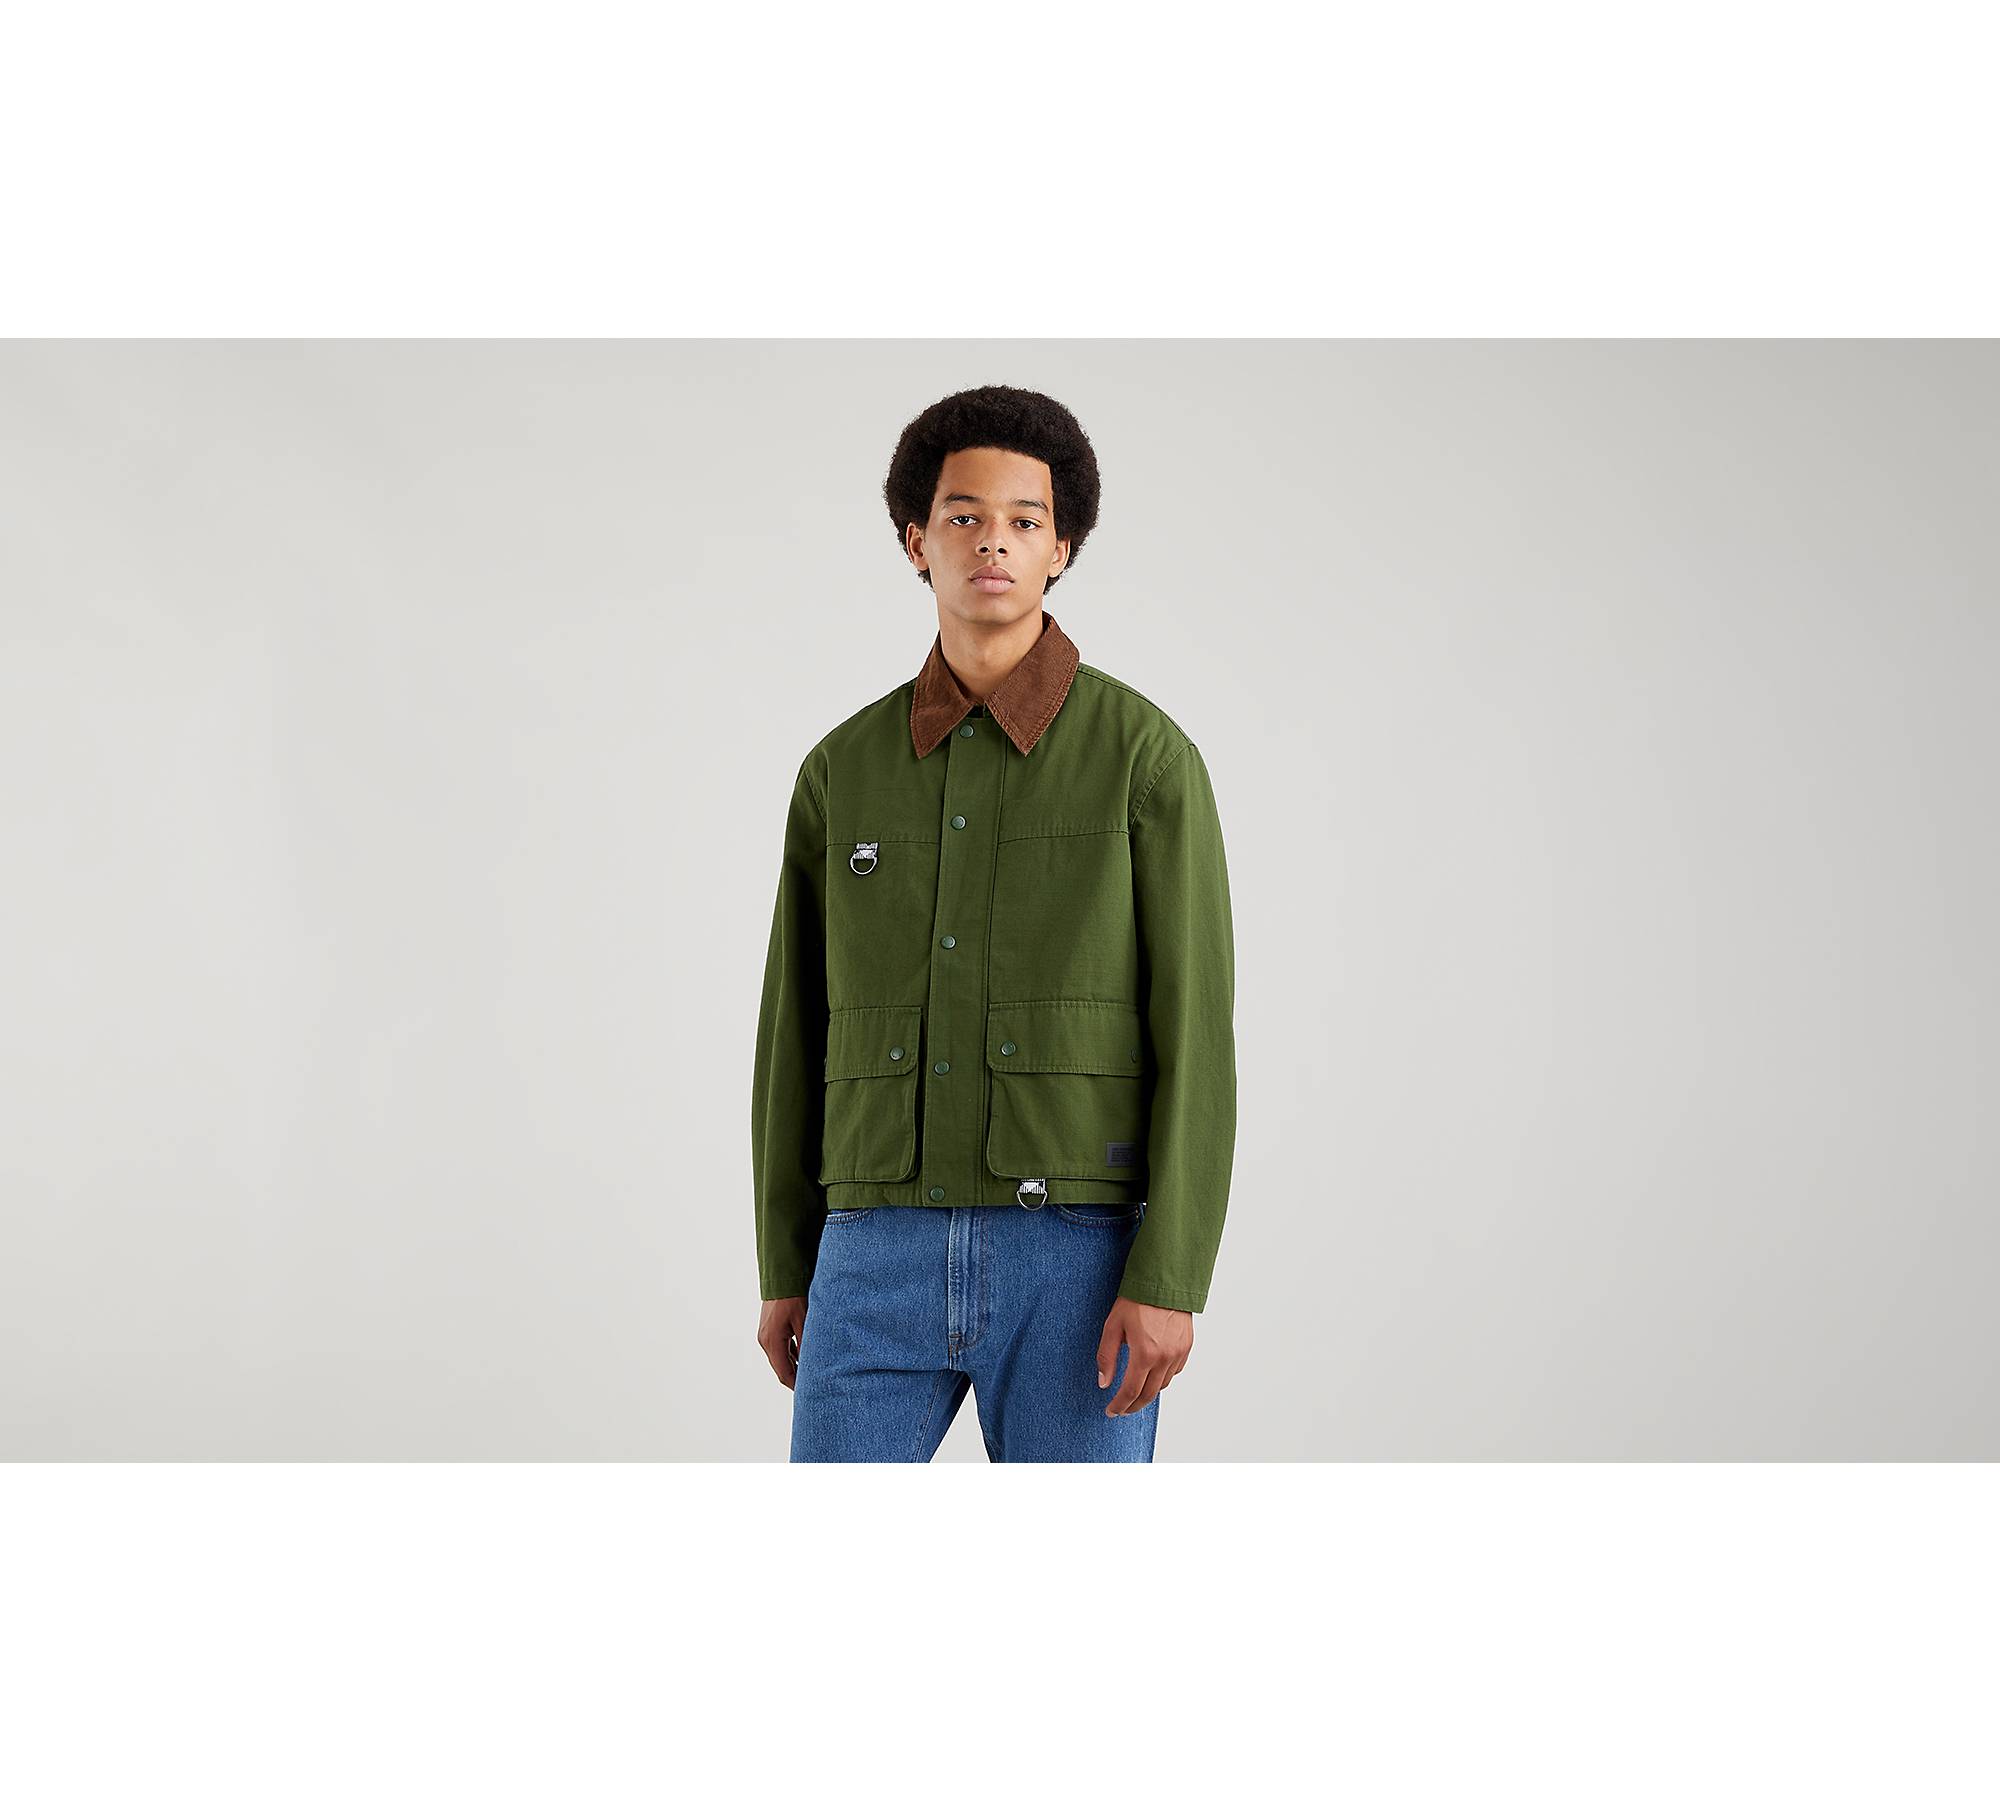 Levi's fishing jacket in green with collar